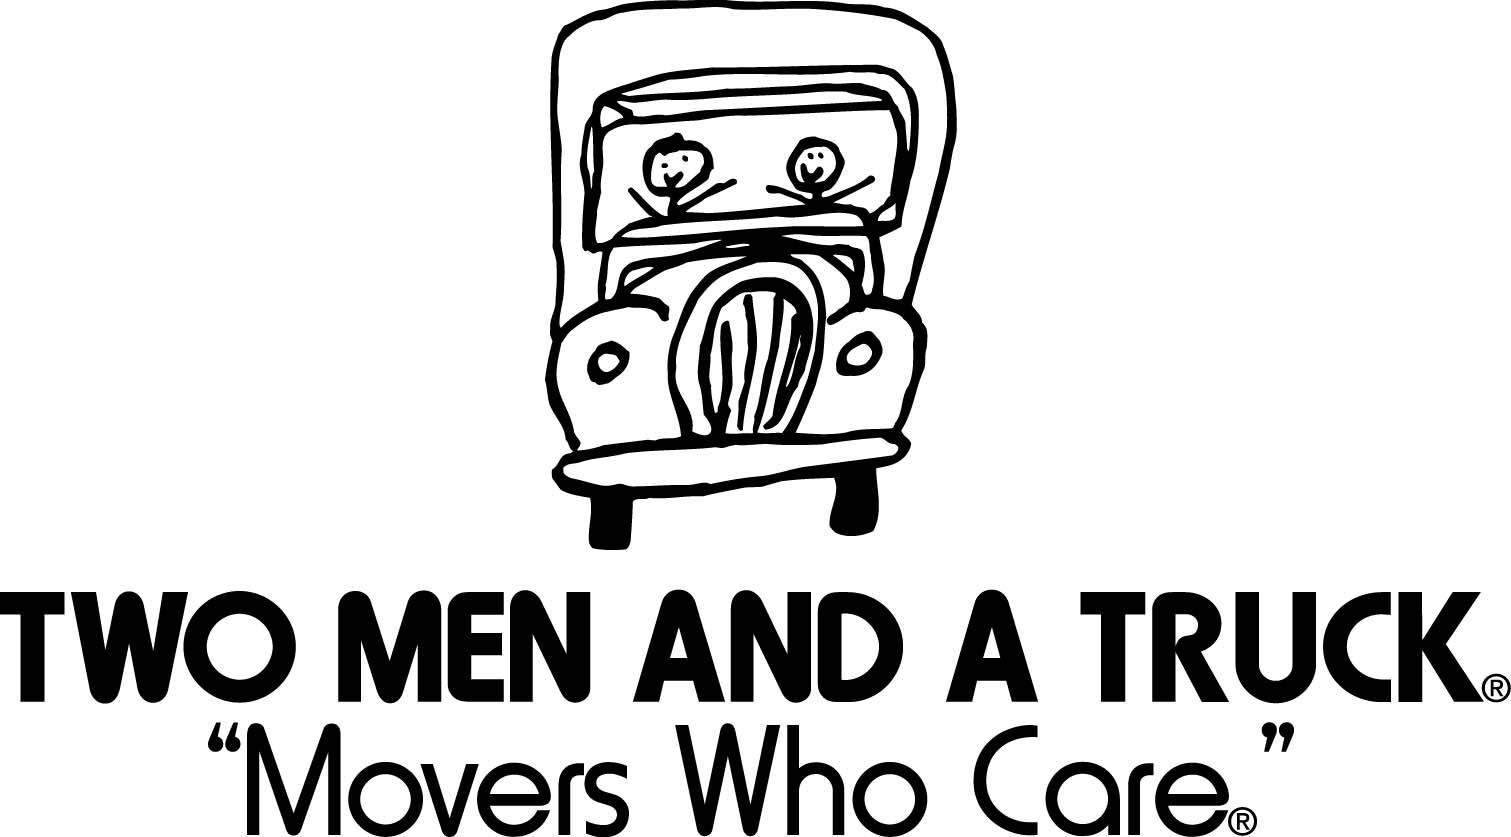 Two Men And A Truck  company logo